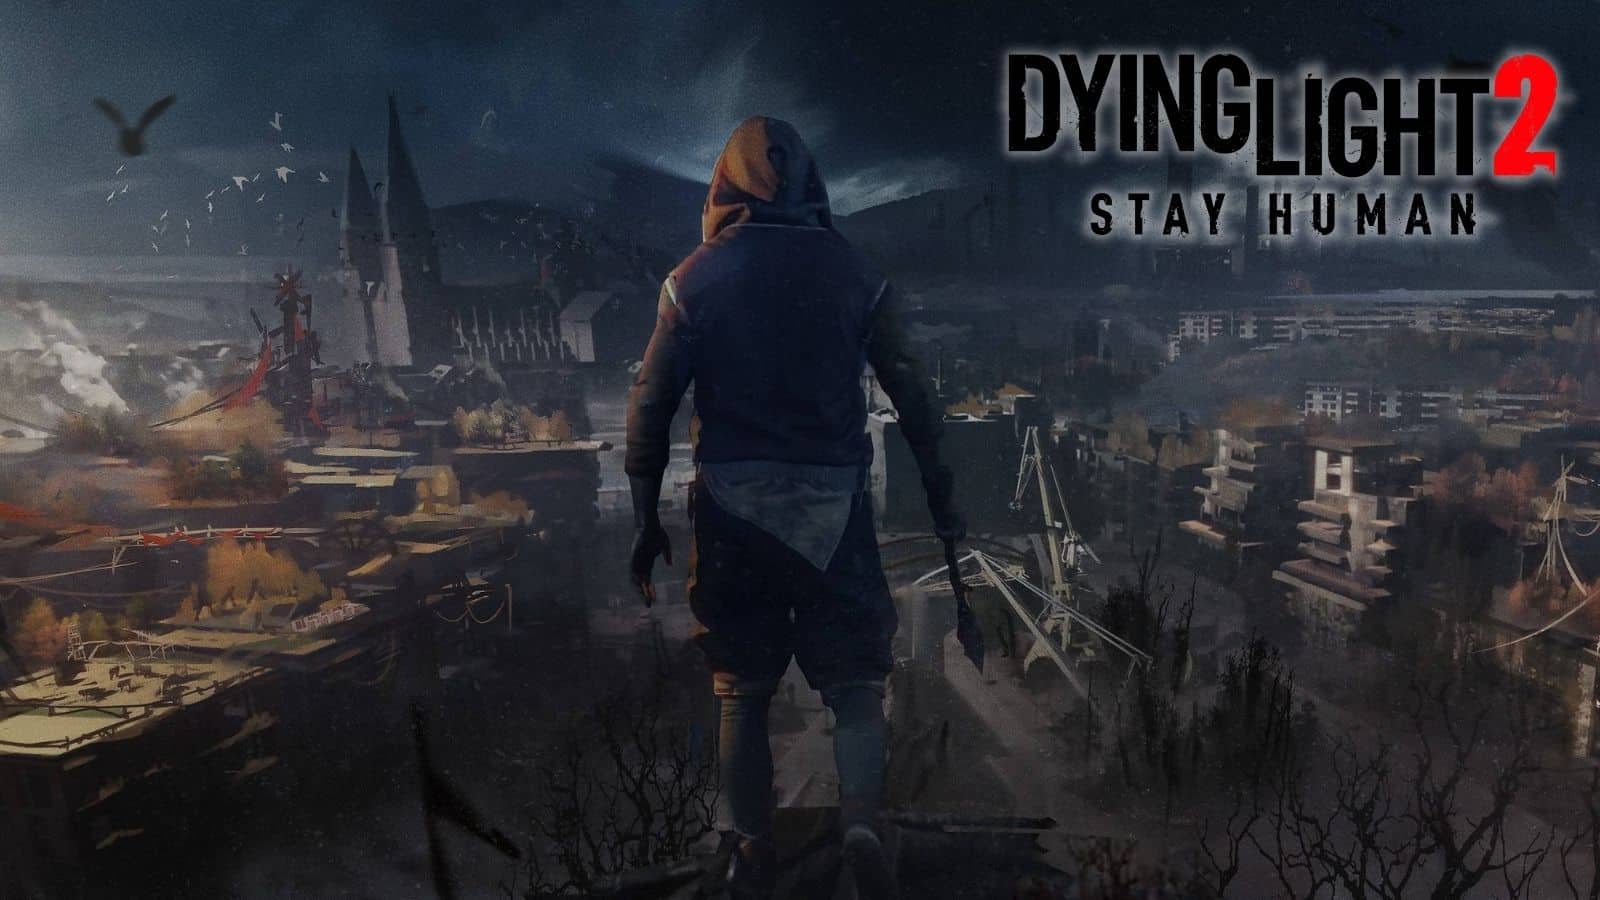 Dying Light 2 character overlooking city